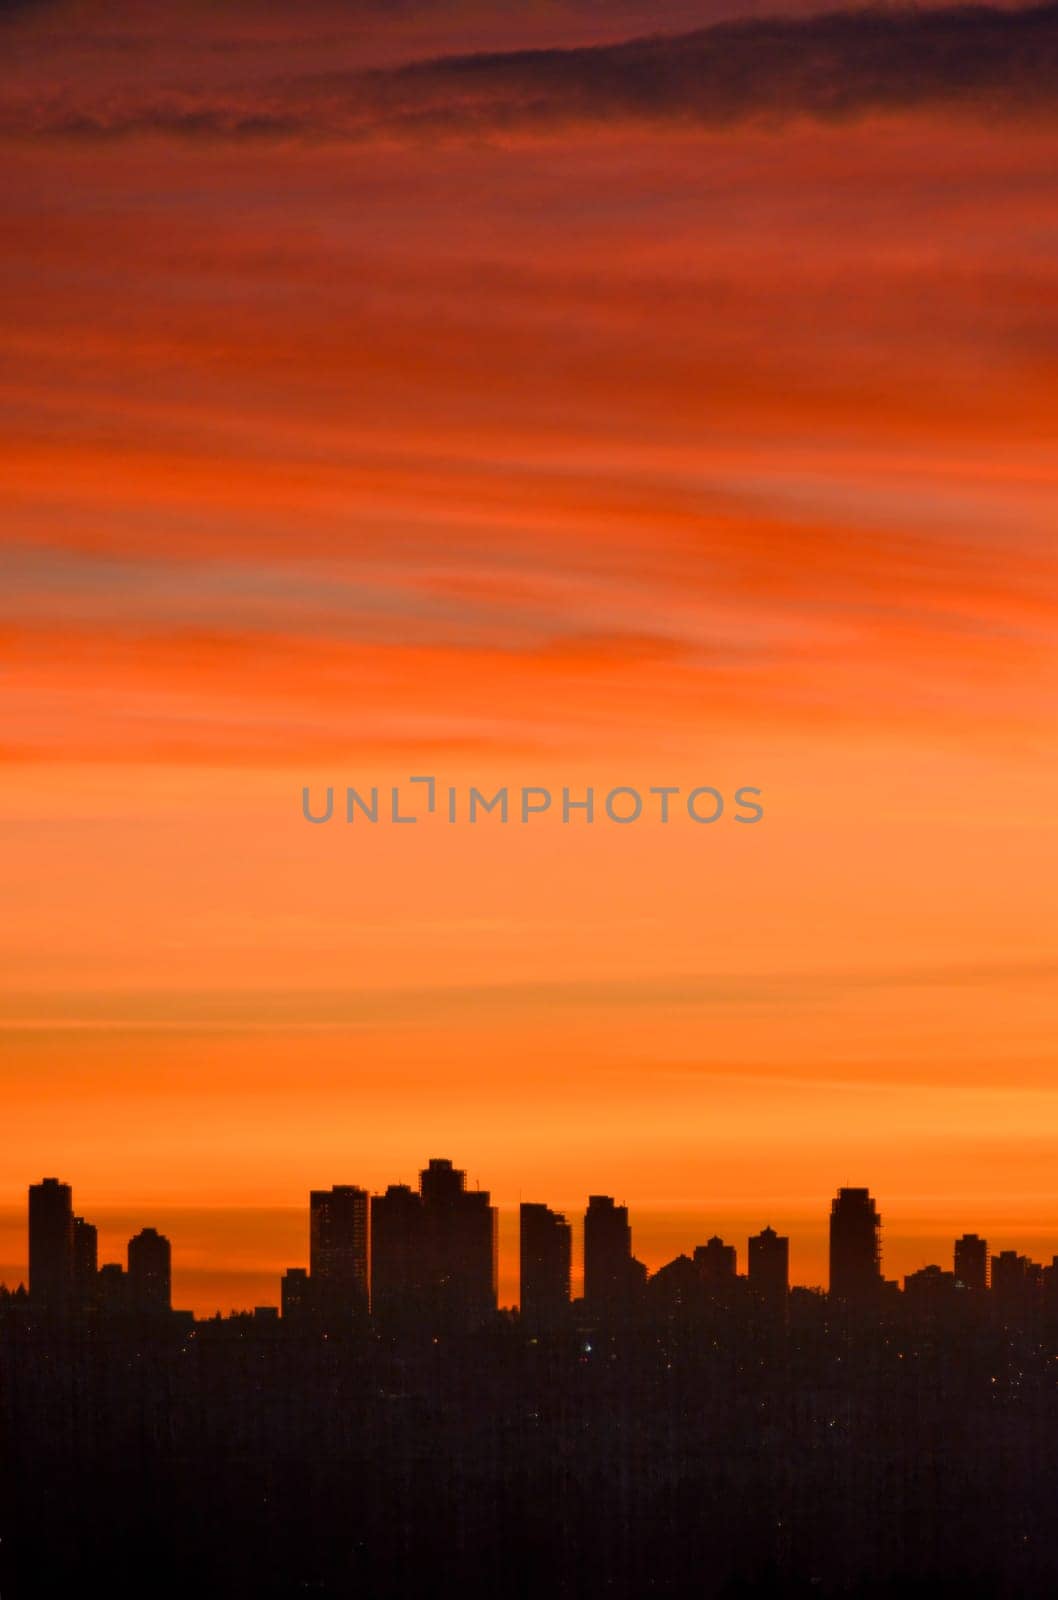 Urban silhouette of buildings on sunset sky background by Imagenet